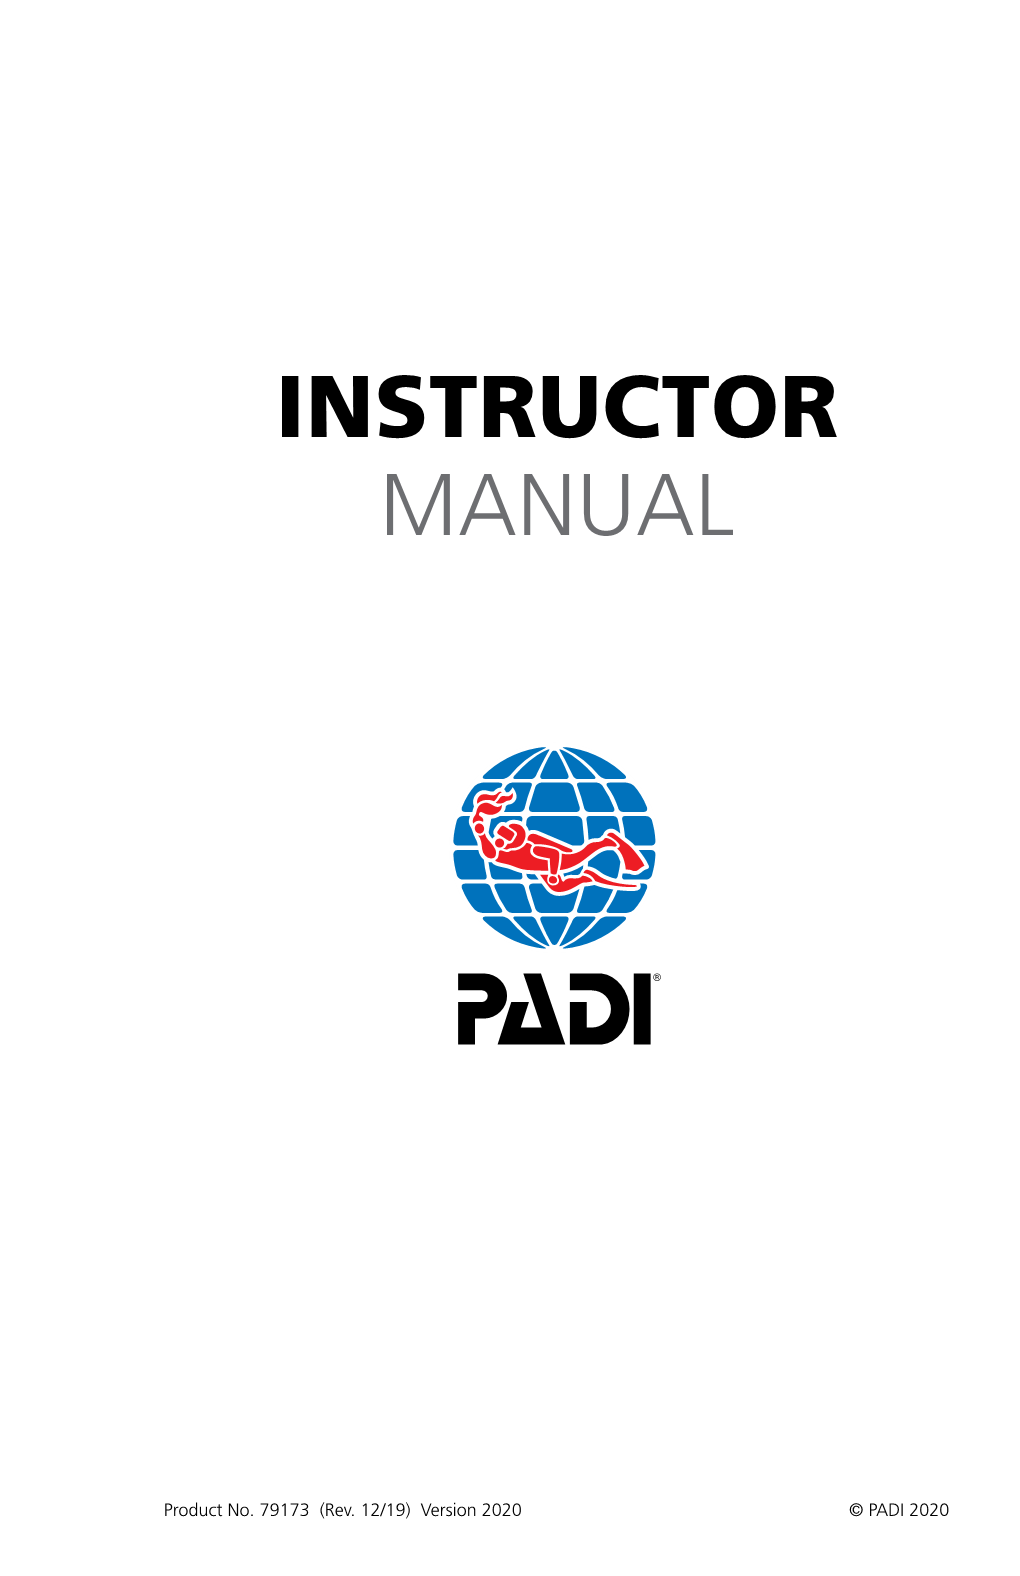 2020 Instructor Manual